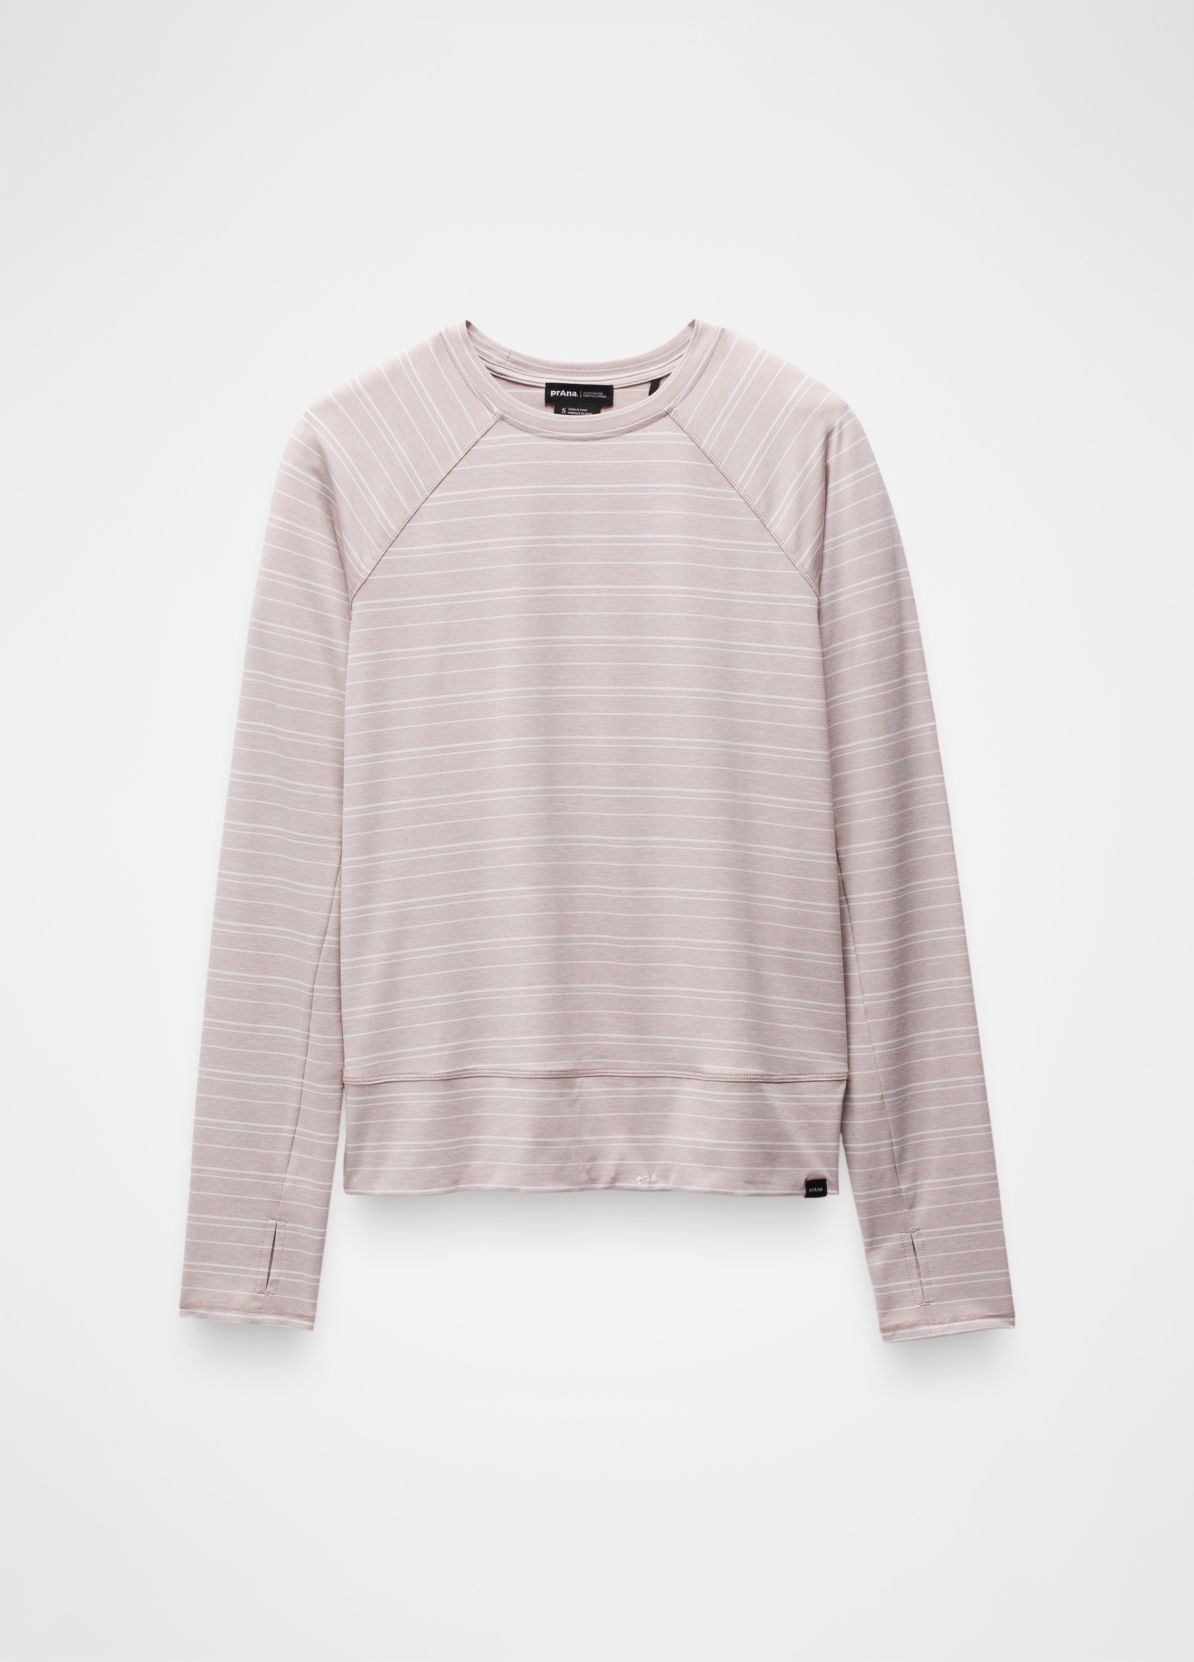 W's Sol Searcher Long Sleeve Top